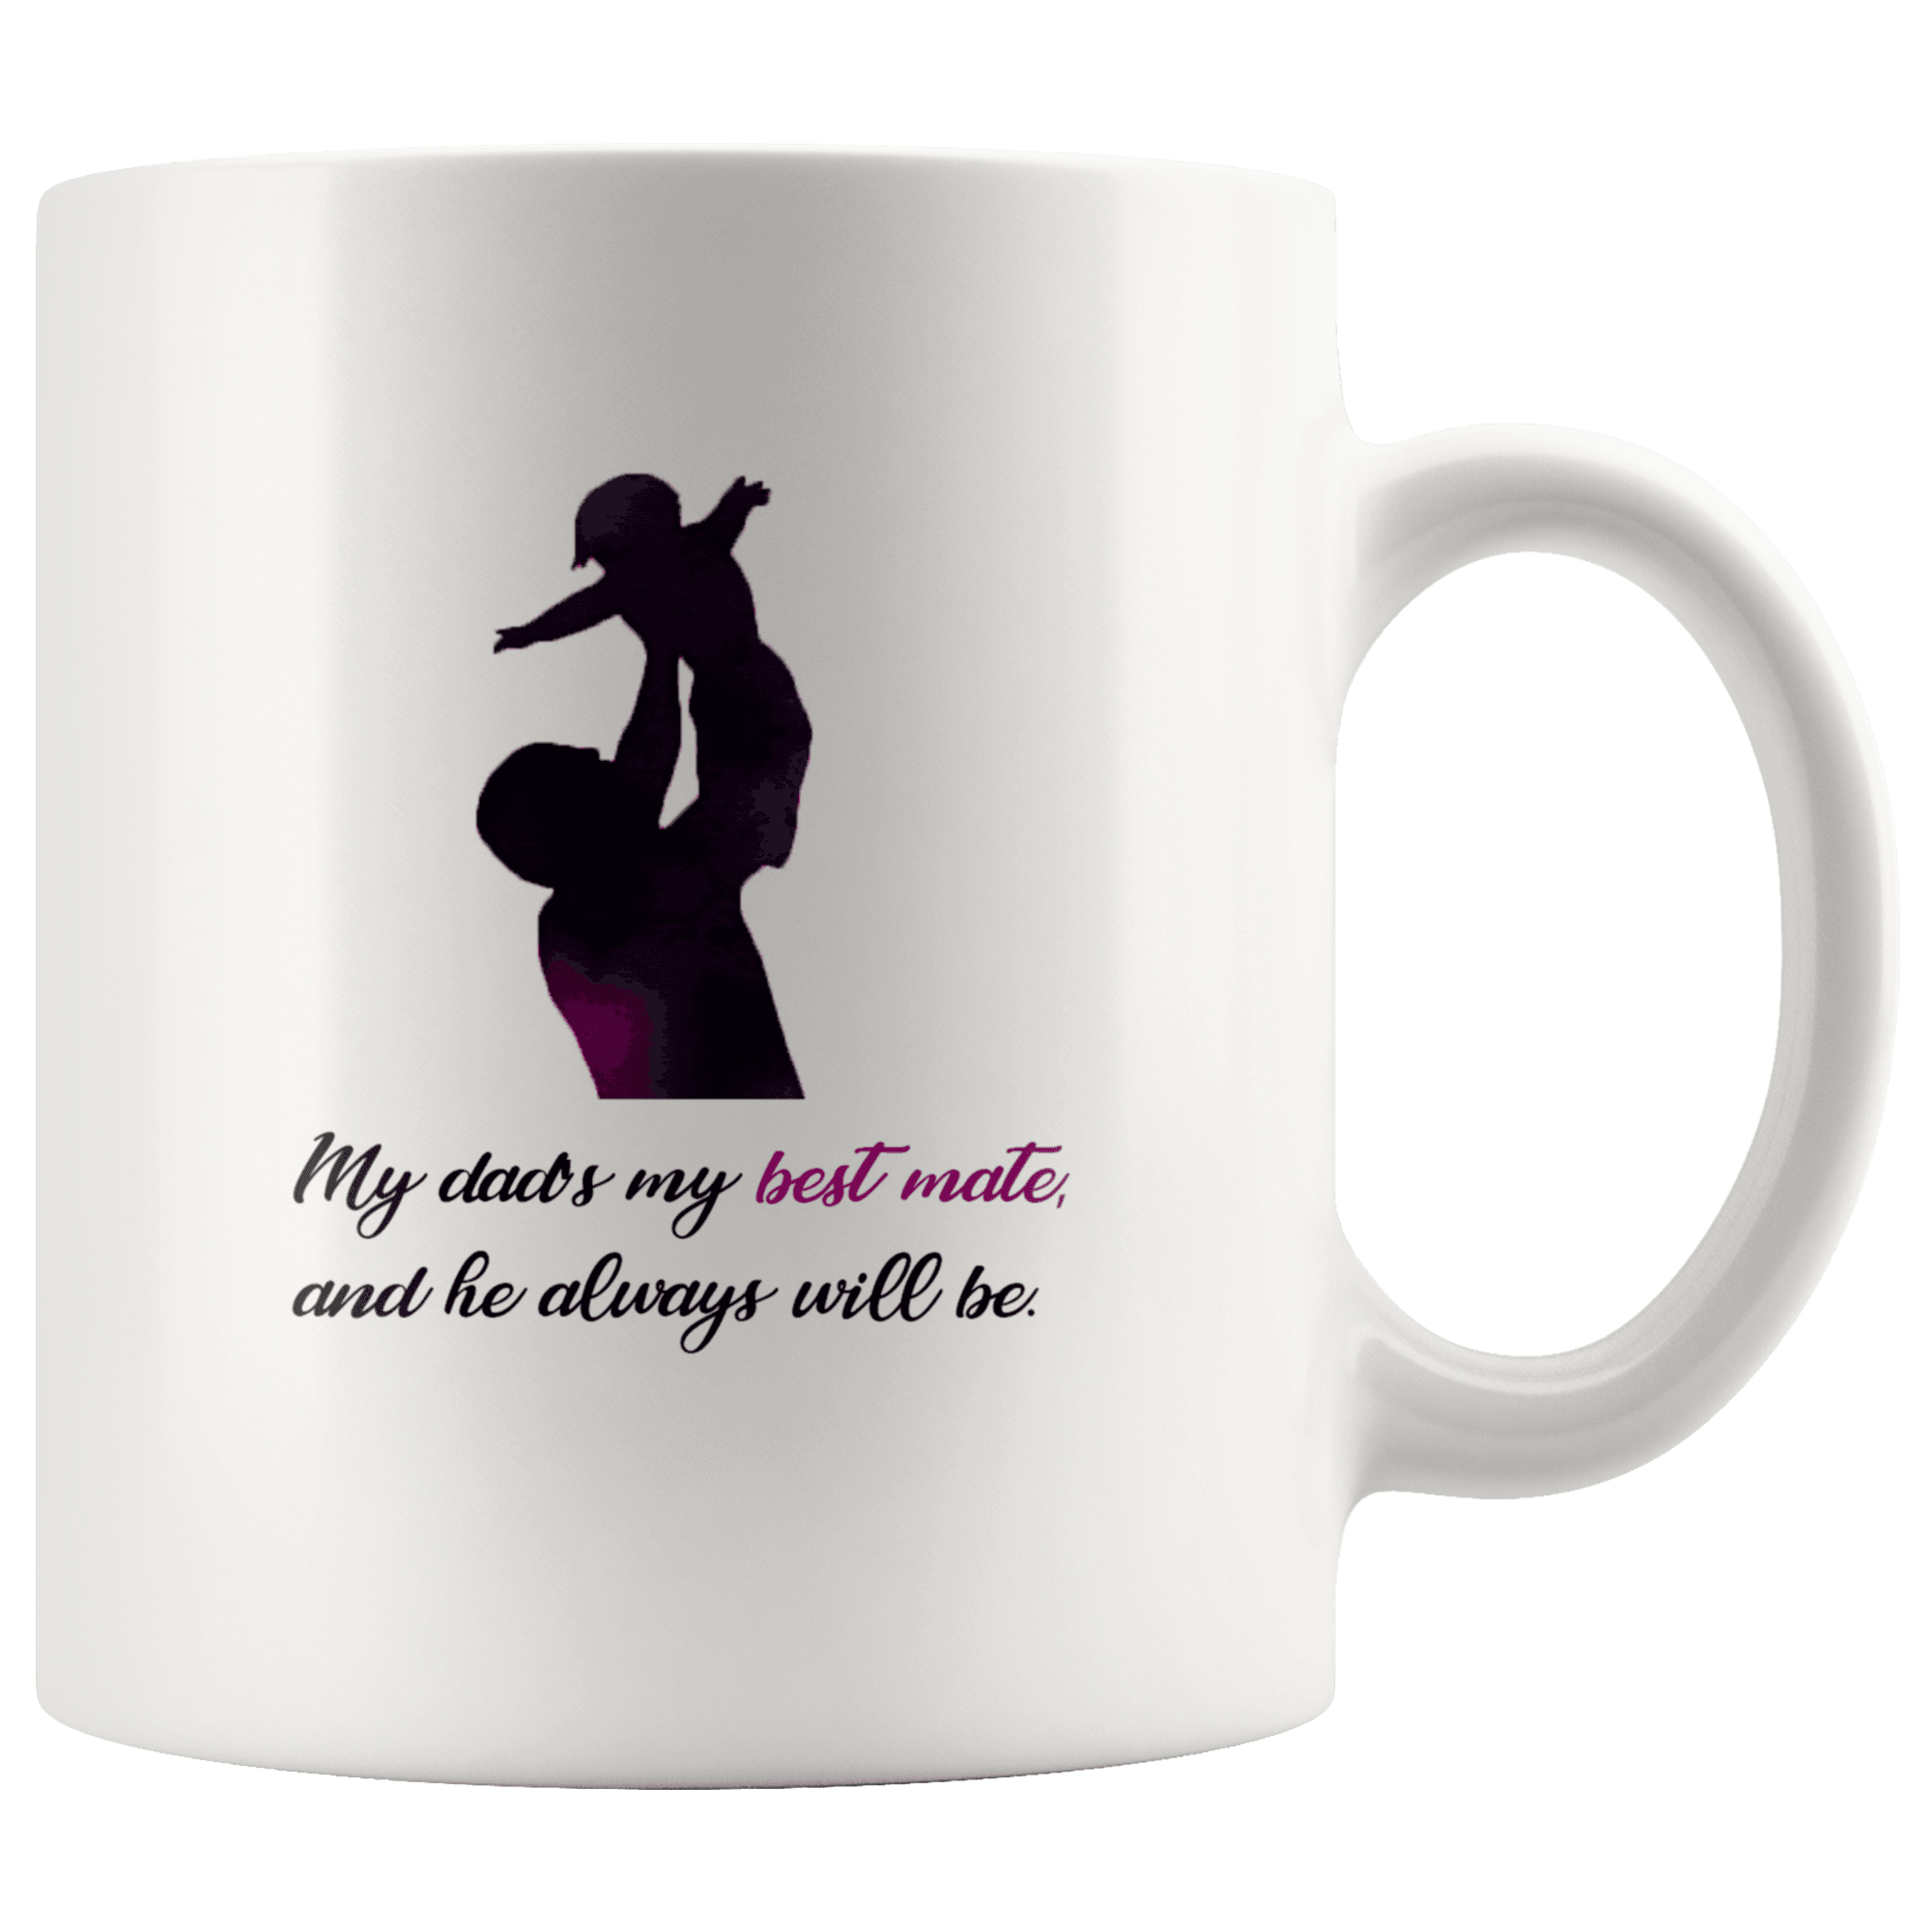 Great Coffee Mug For Father - My Dad's My Best Mate, And He Always Will Be. - SPCM